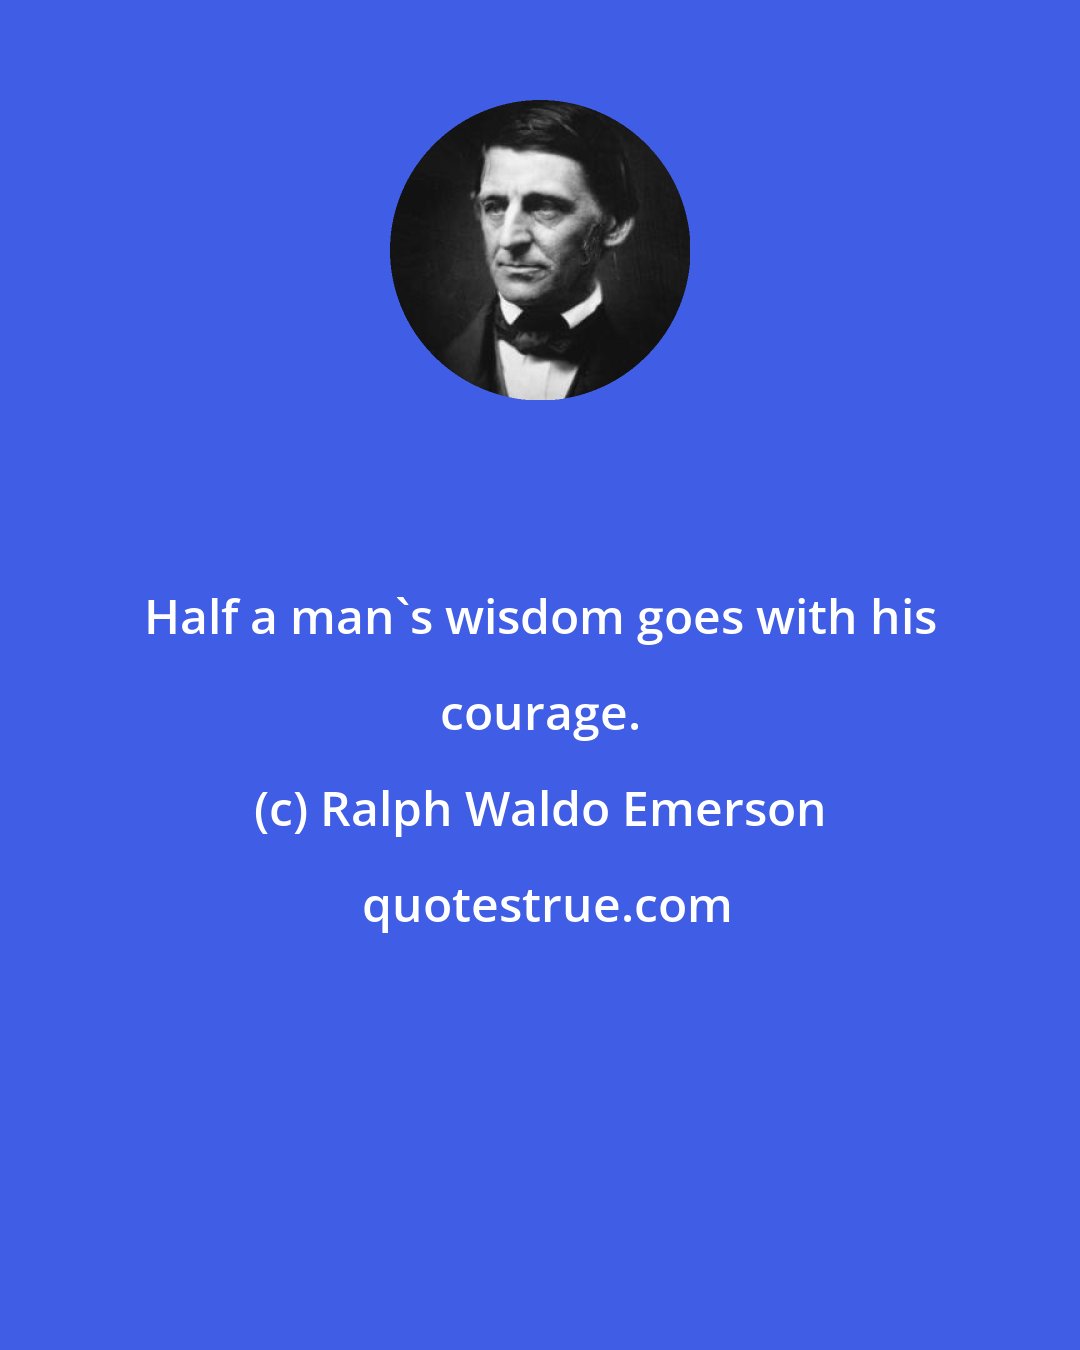 Ralph Waldo Emerson: Half a man's wisdom goes with his courage.